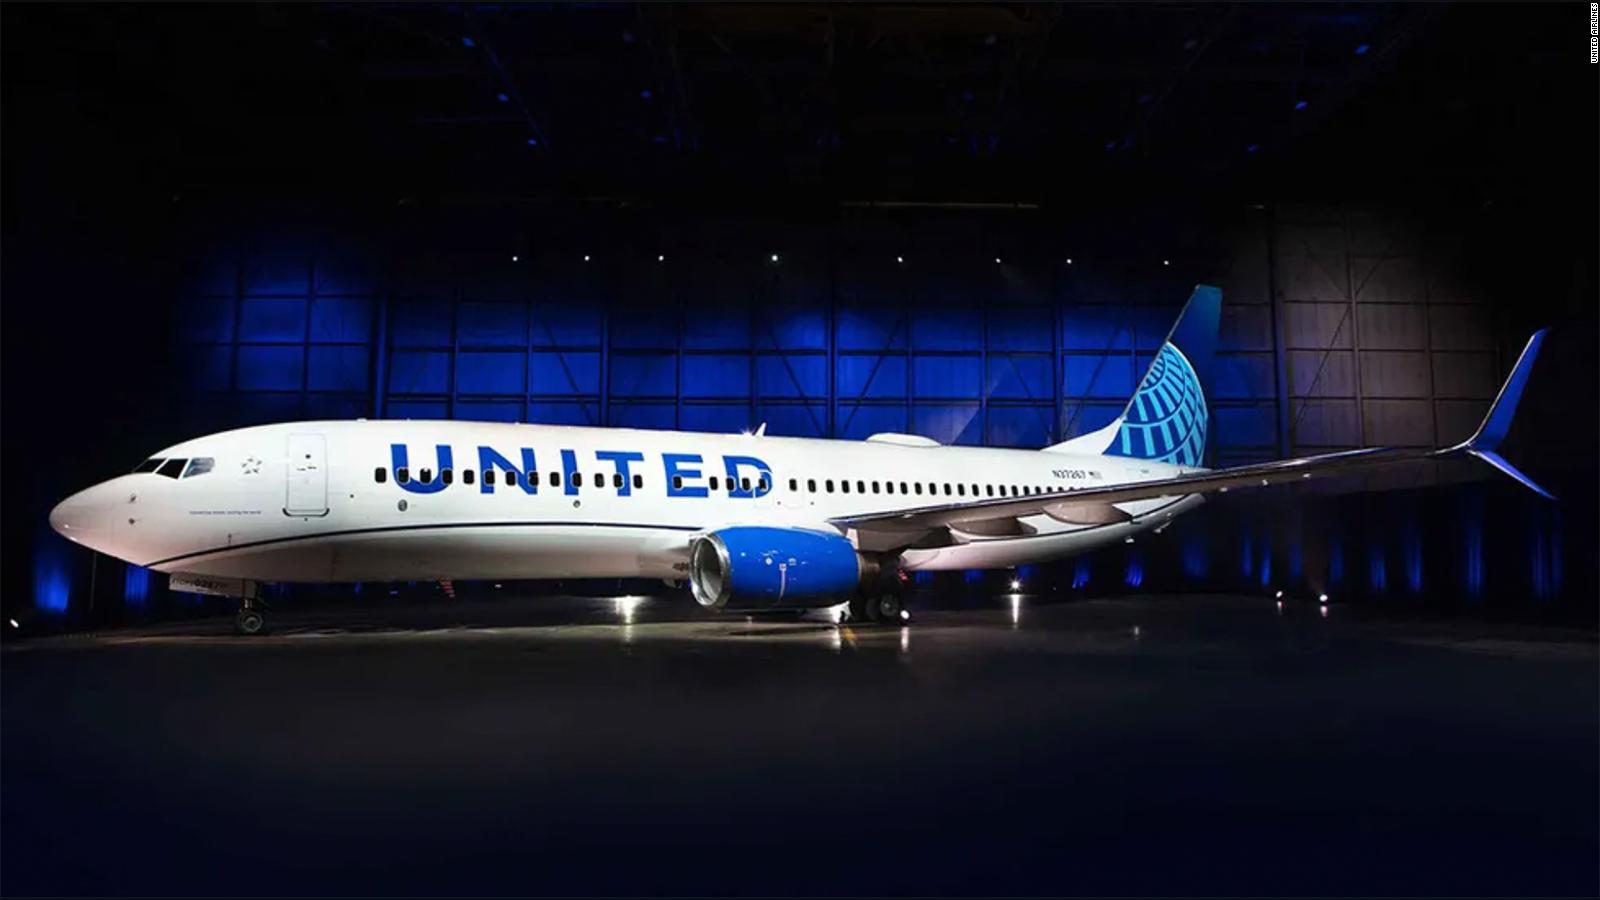 United Airlines will allow unvaccinated employees to come back to work